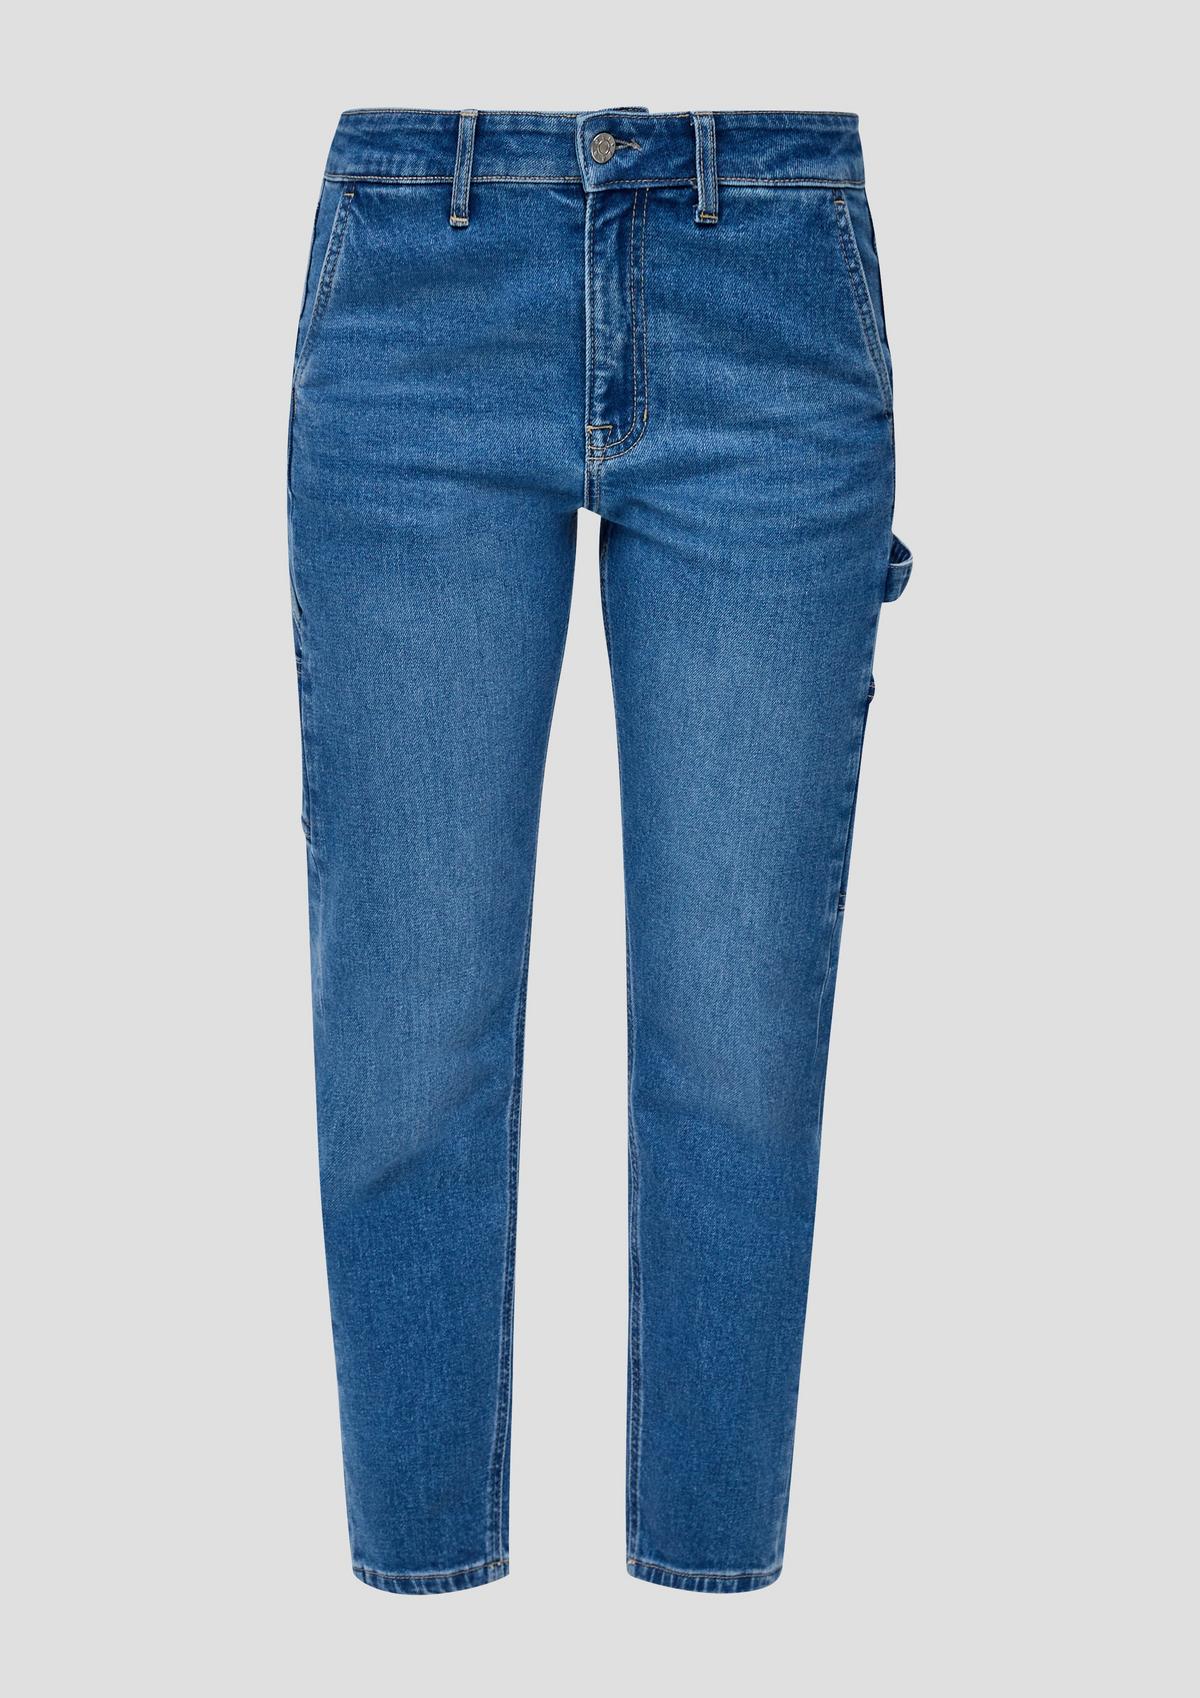 s.Oliver Ankle Jeans Francis / Relaxed Fit / Mid Rise / Tapered Leg / Boyfriend